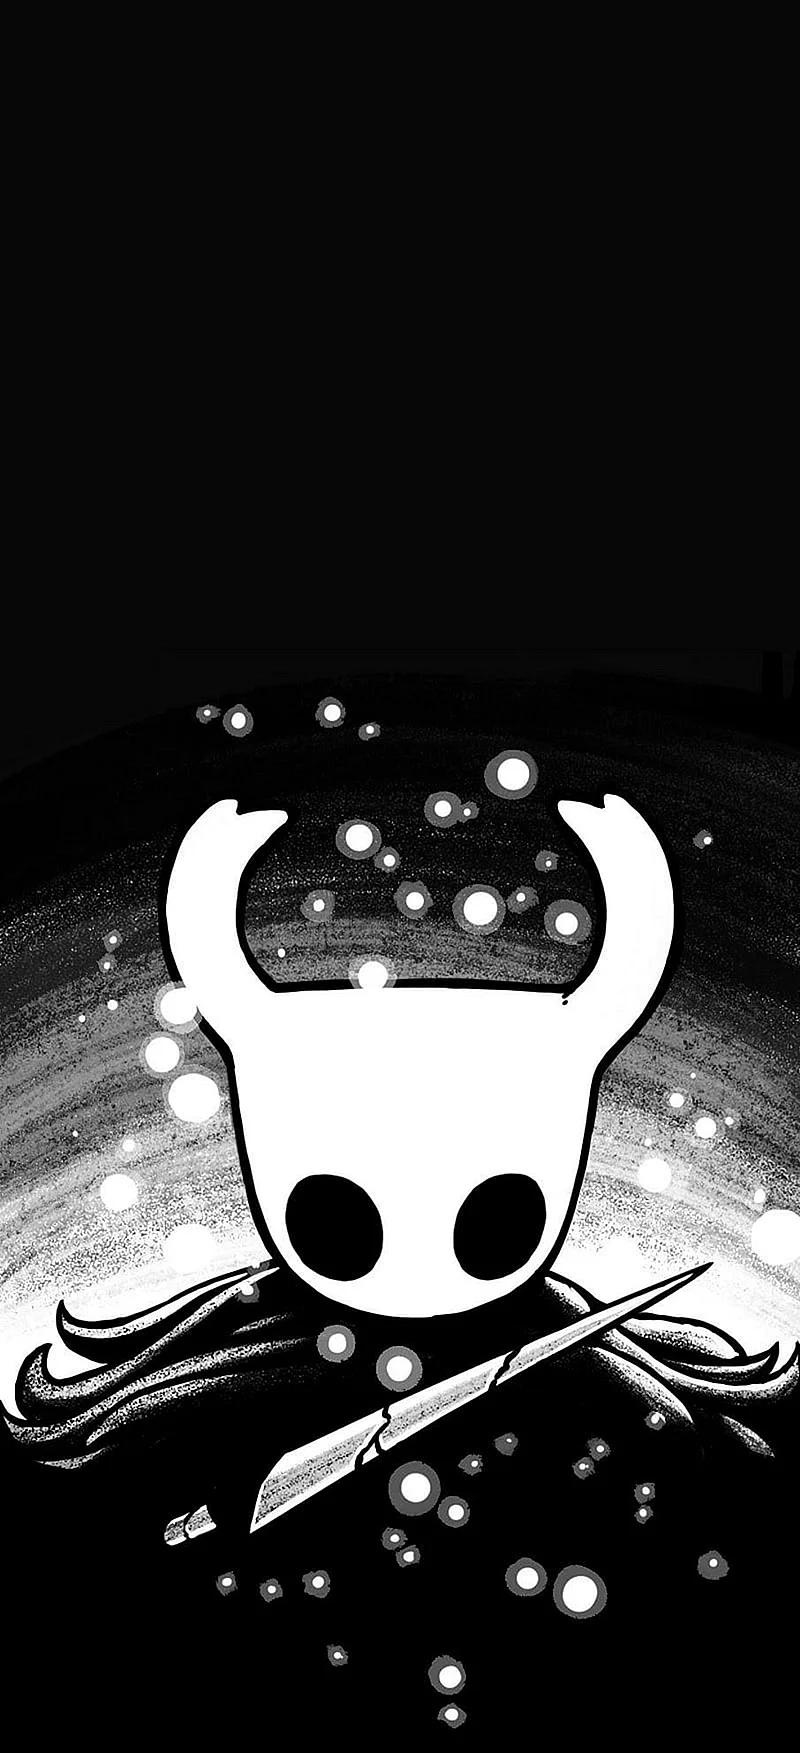 Hollow Knight Avatar Wallpaper For iPhone